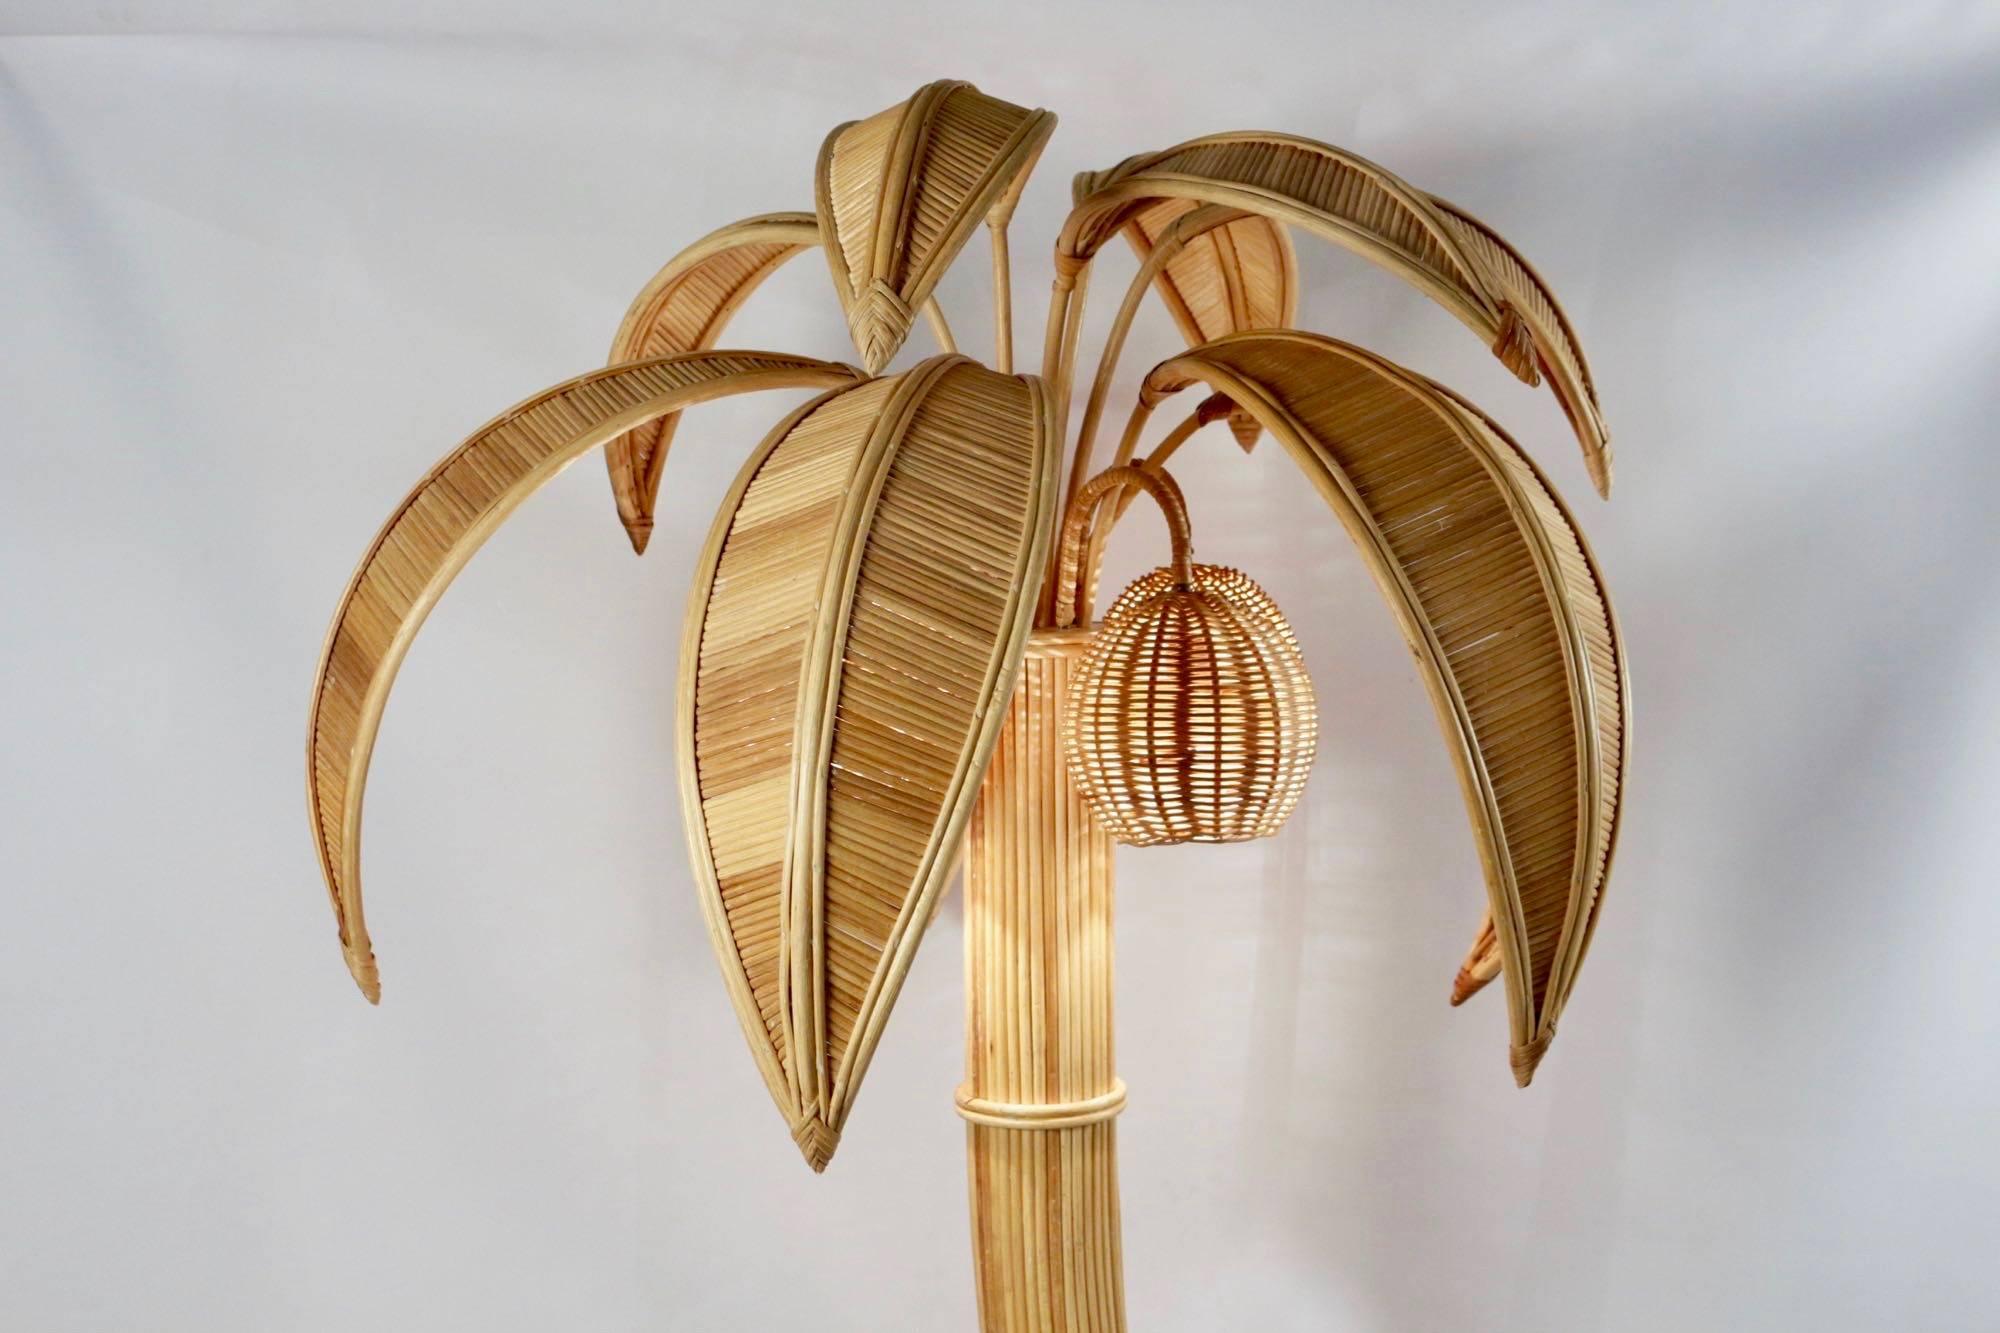 1970s large rattan coconut tree floor lamp.

The trunk, softly wavy is made of bamboo stems.
Three lampshades in shape of coconut conceal the bulbs.